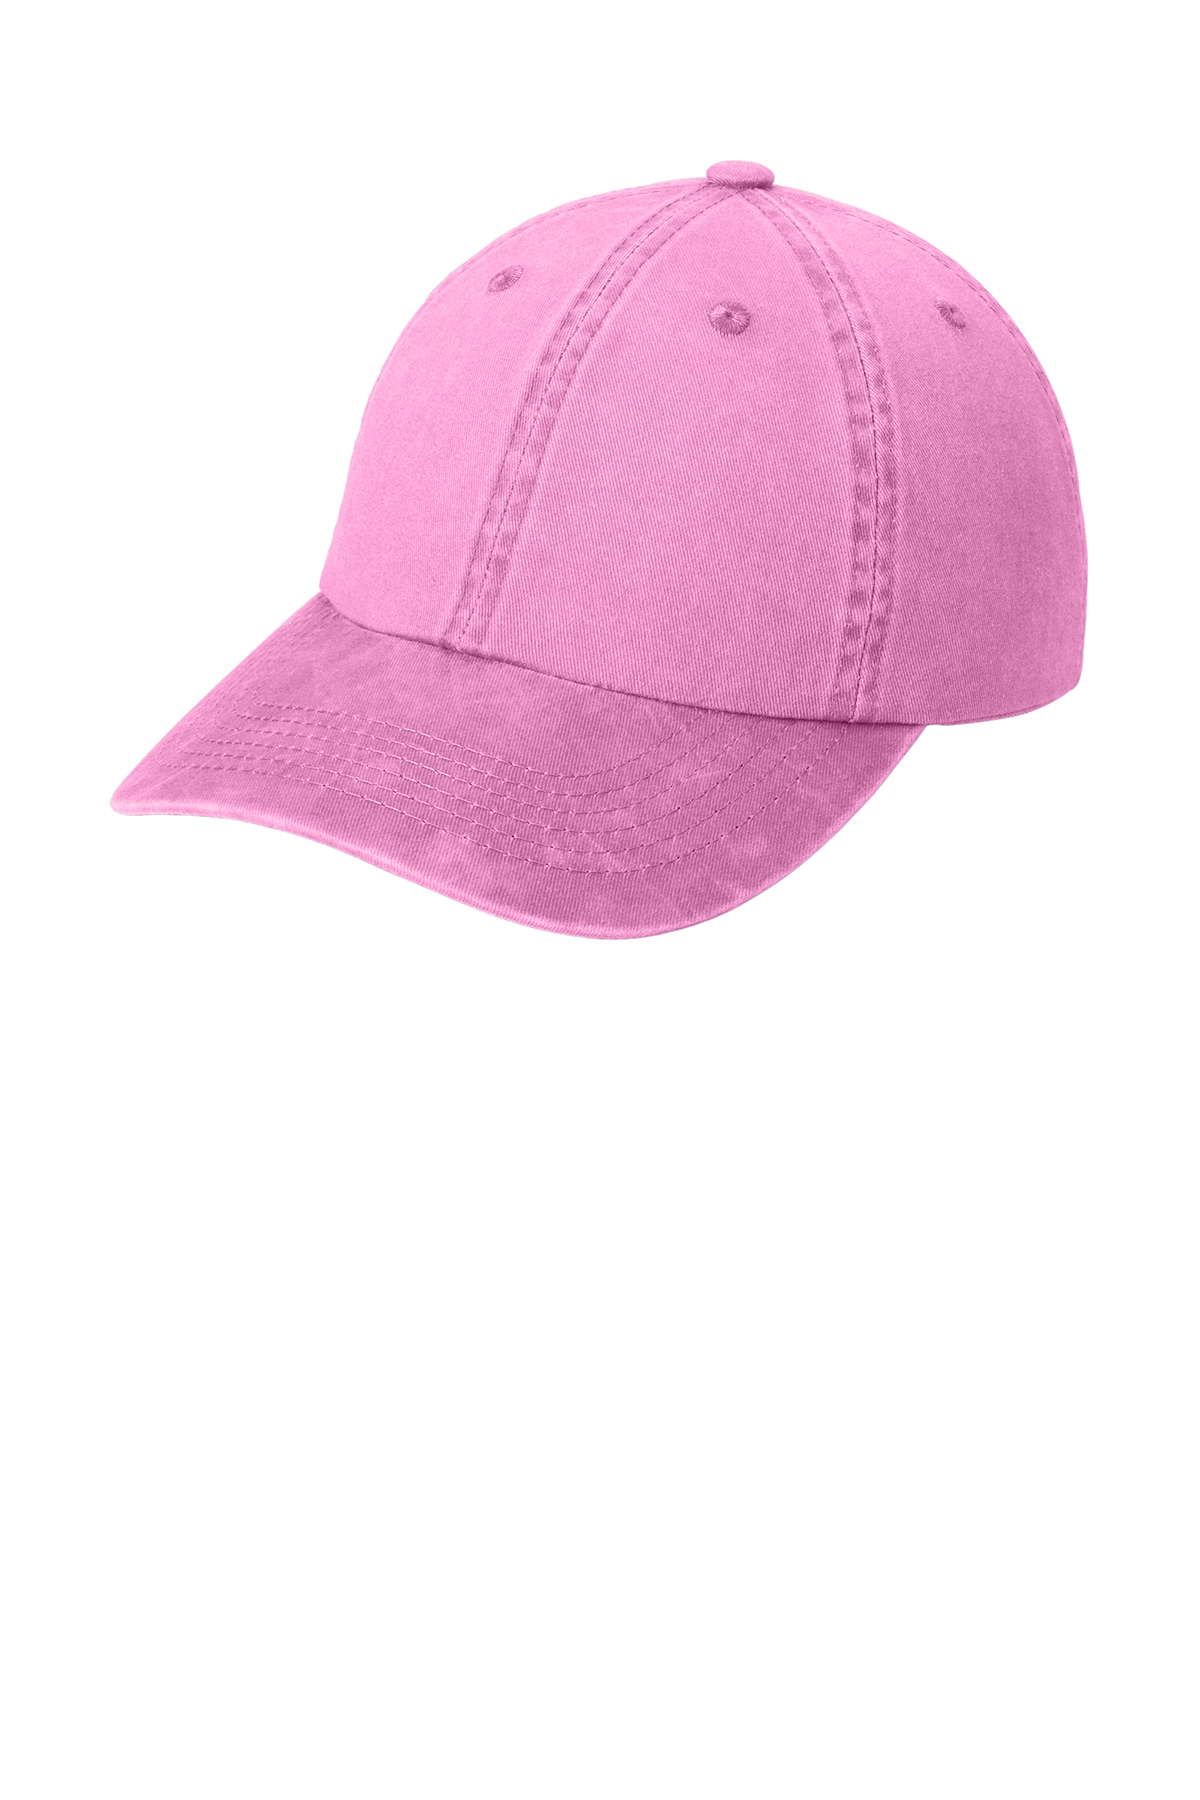 Port Authority Garment Washed Cap | Product | Company Casuals